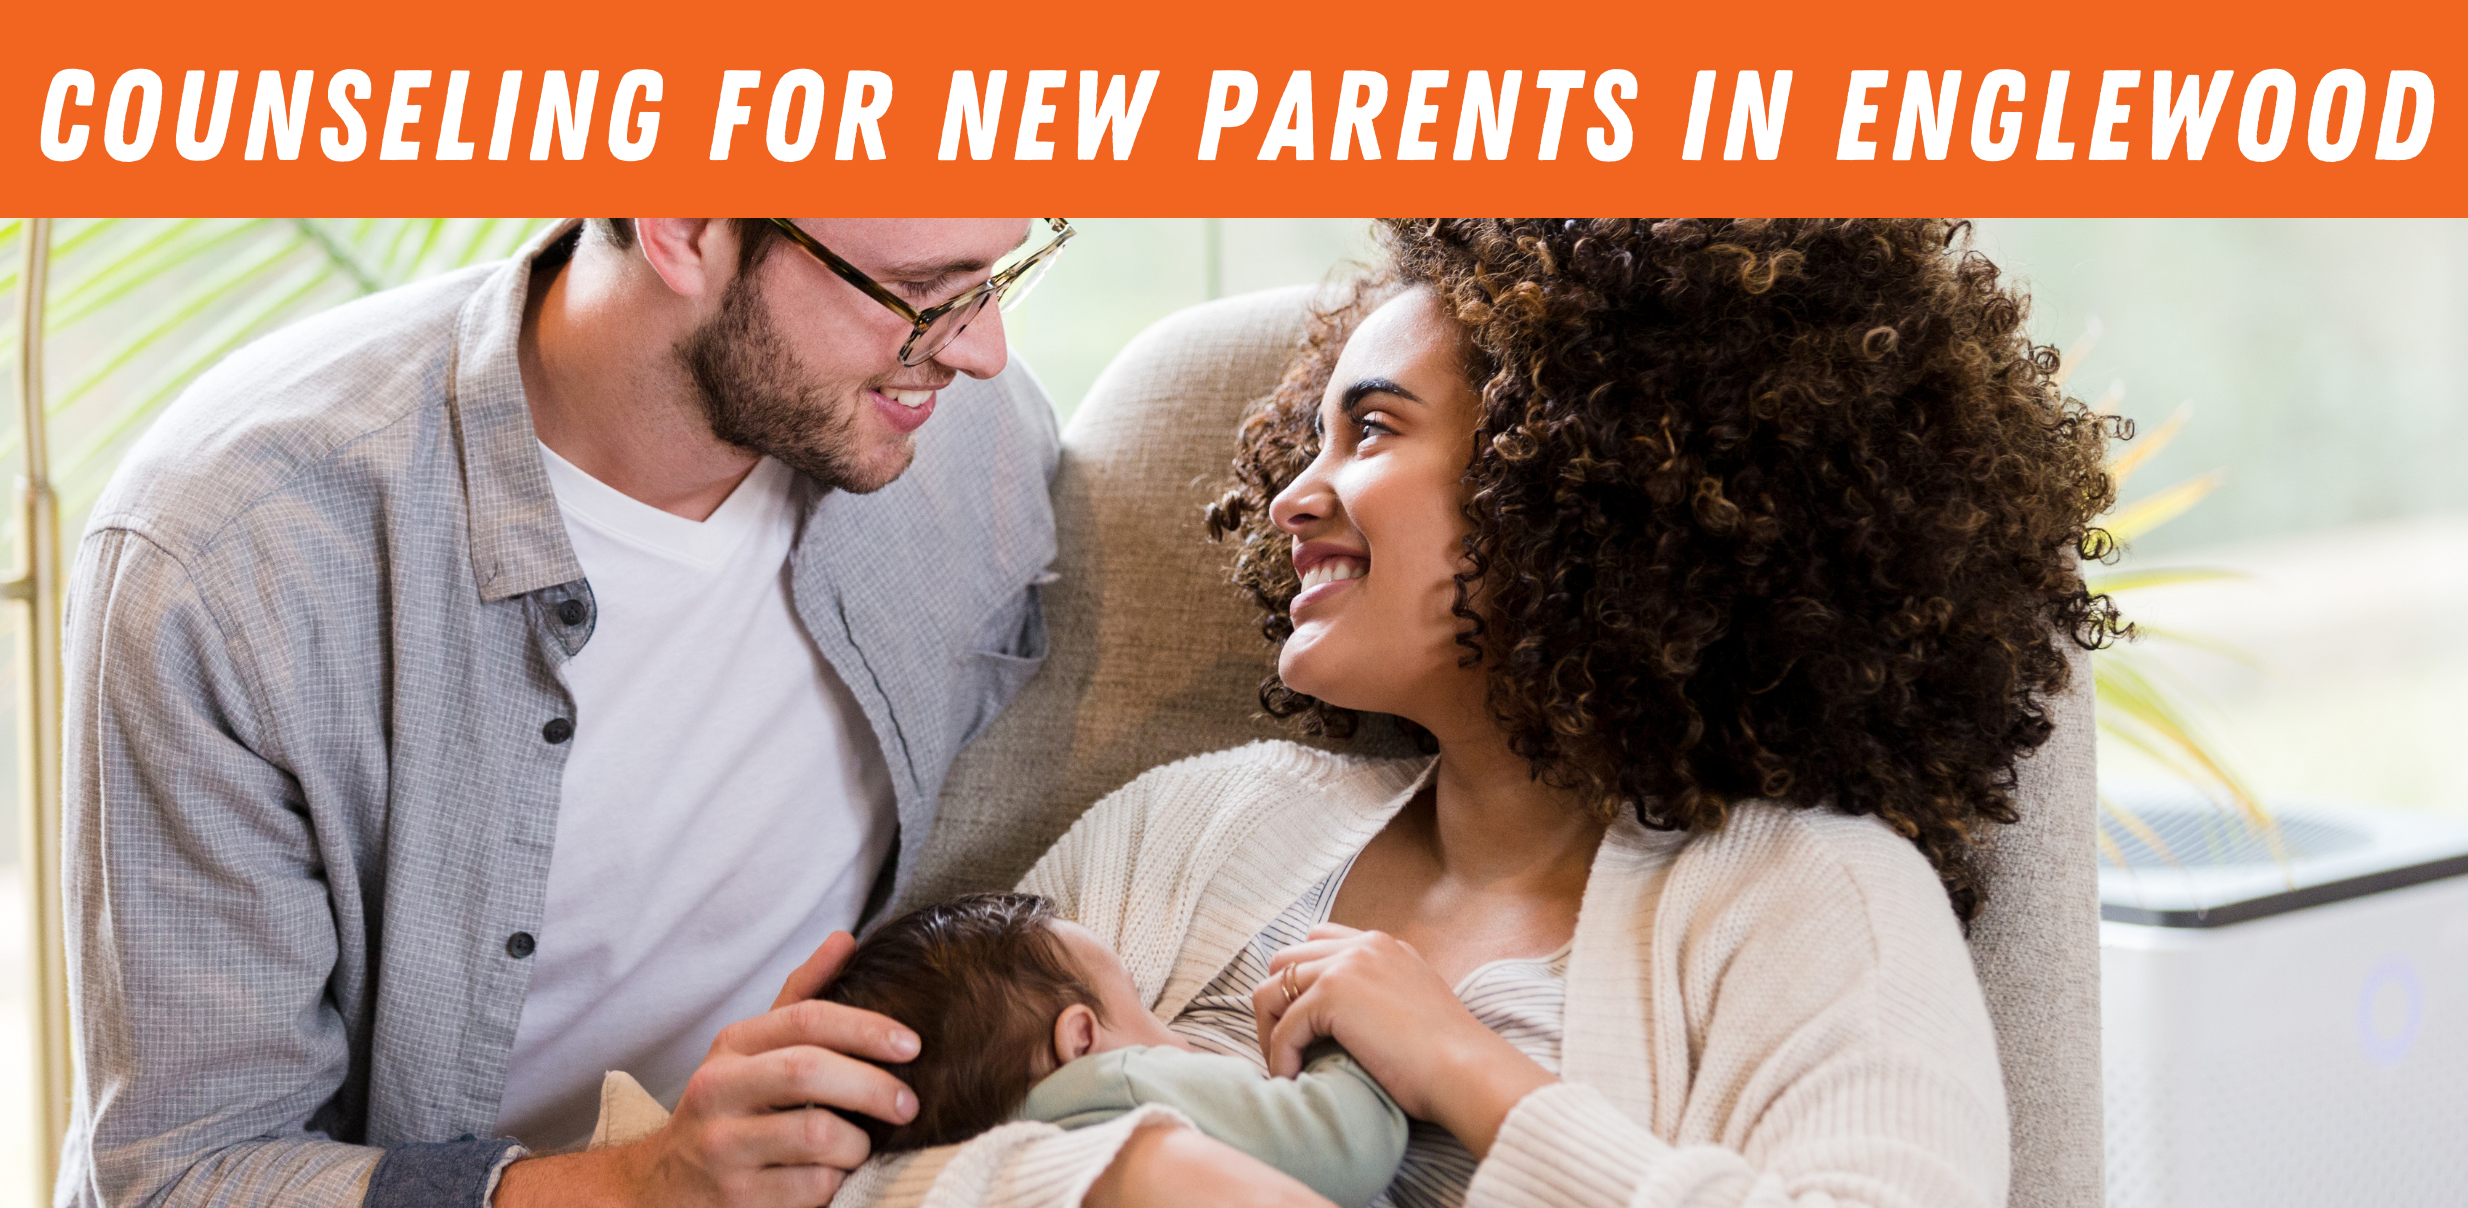 Graphic that reads "Counseling for New Parents in Englewood" above a stock photo of two people and a newborn. The woman, who is Black, is seated with the baby in her arms, and the man, who is white, is crouched next to them.